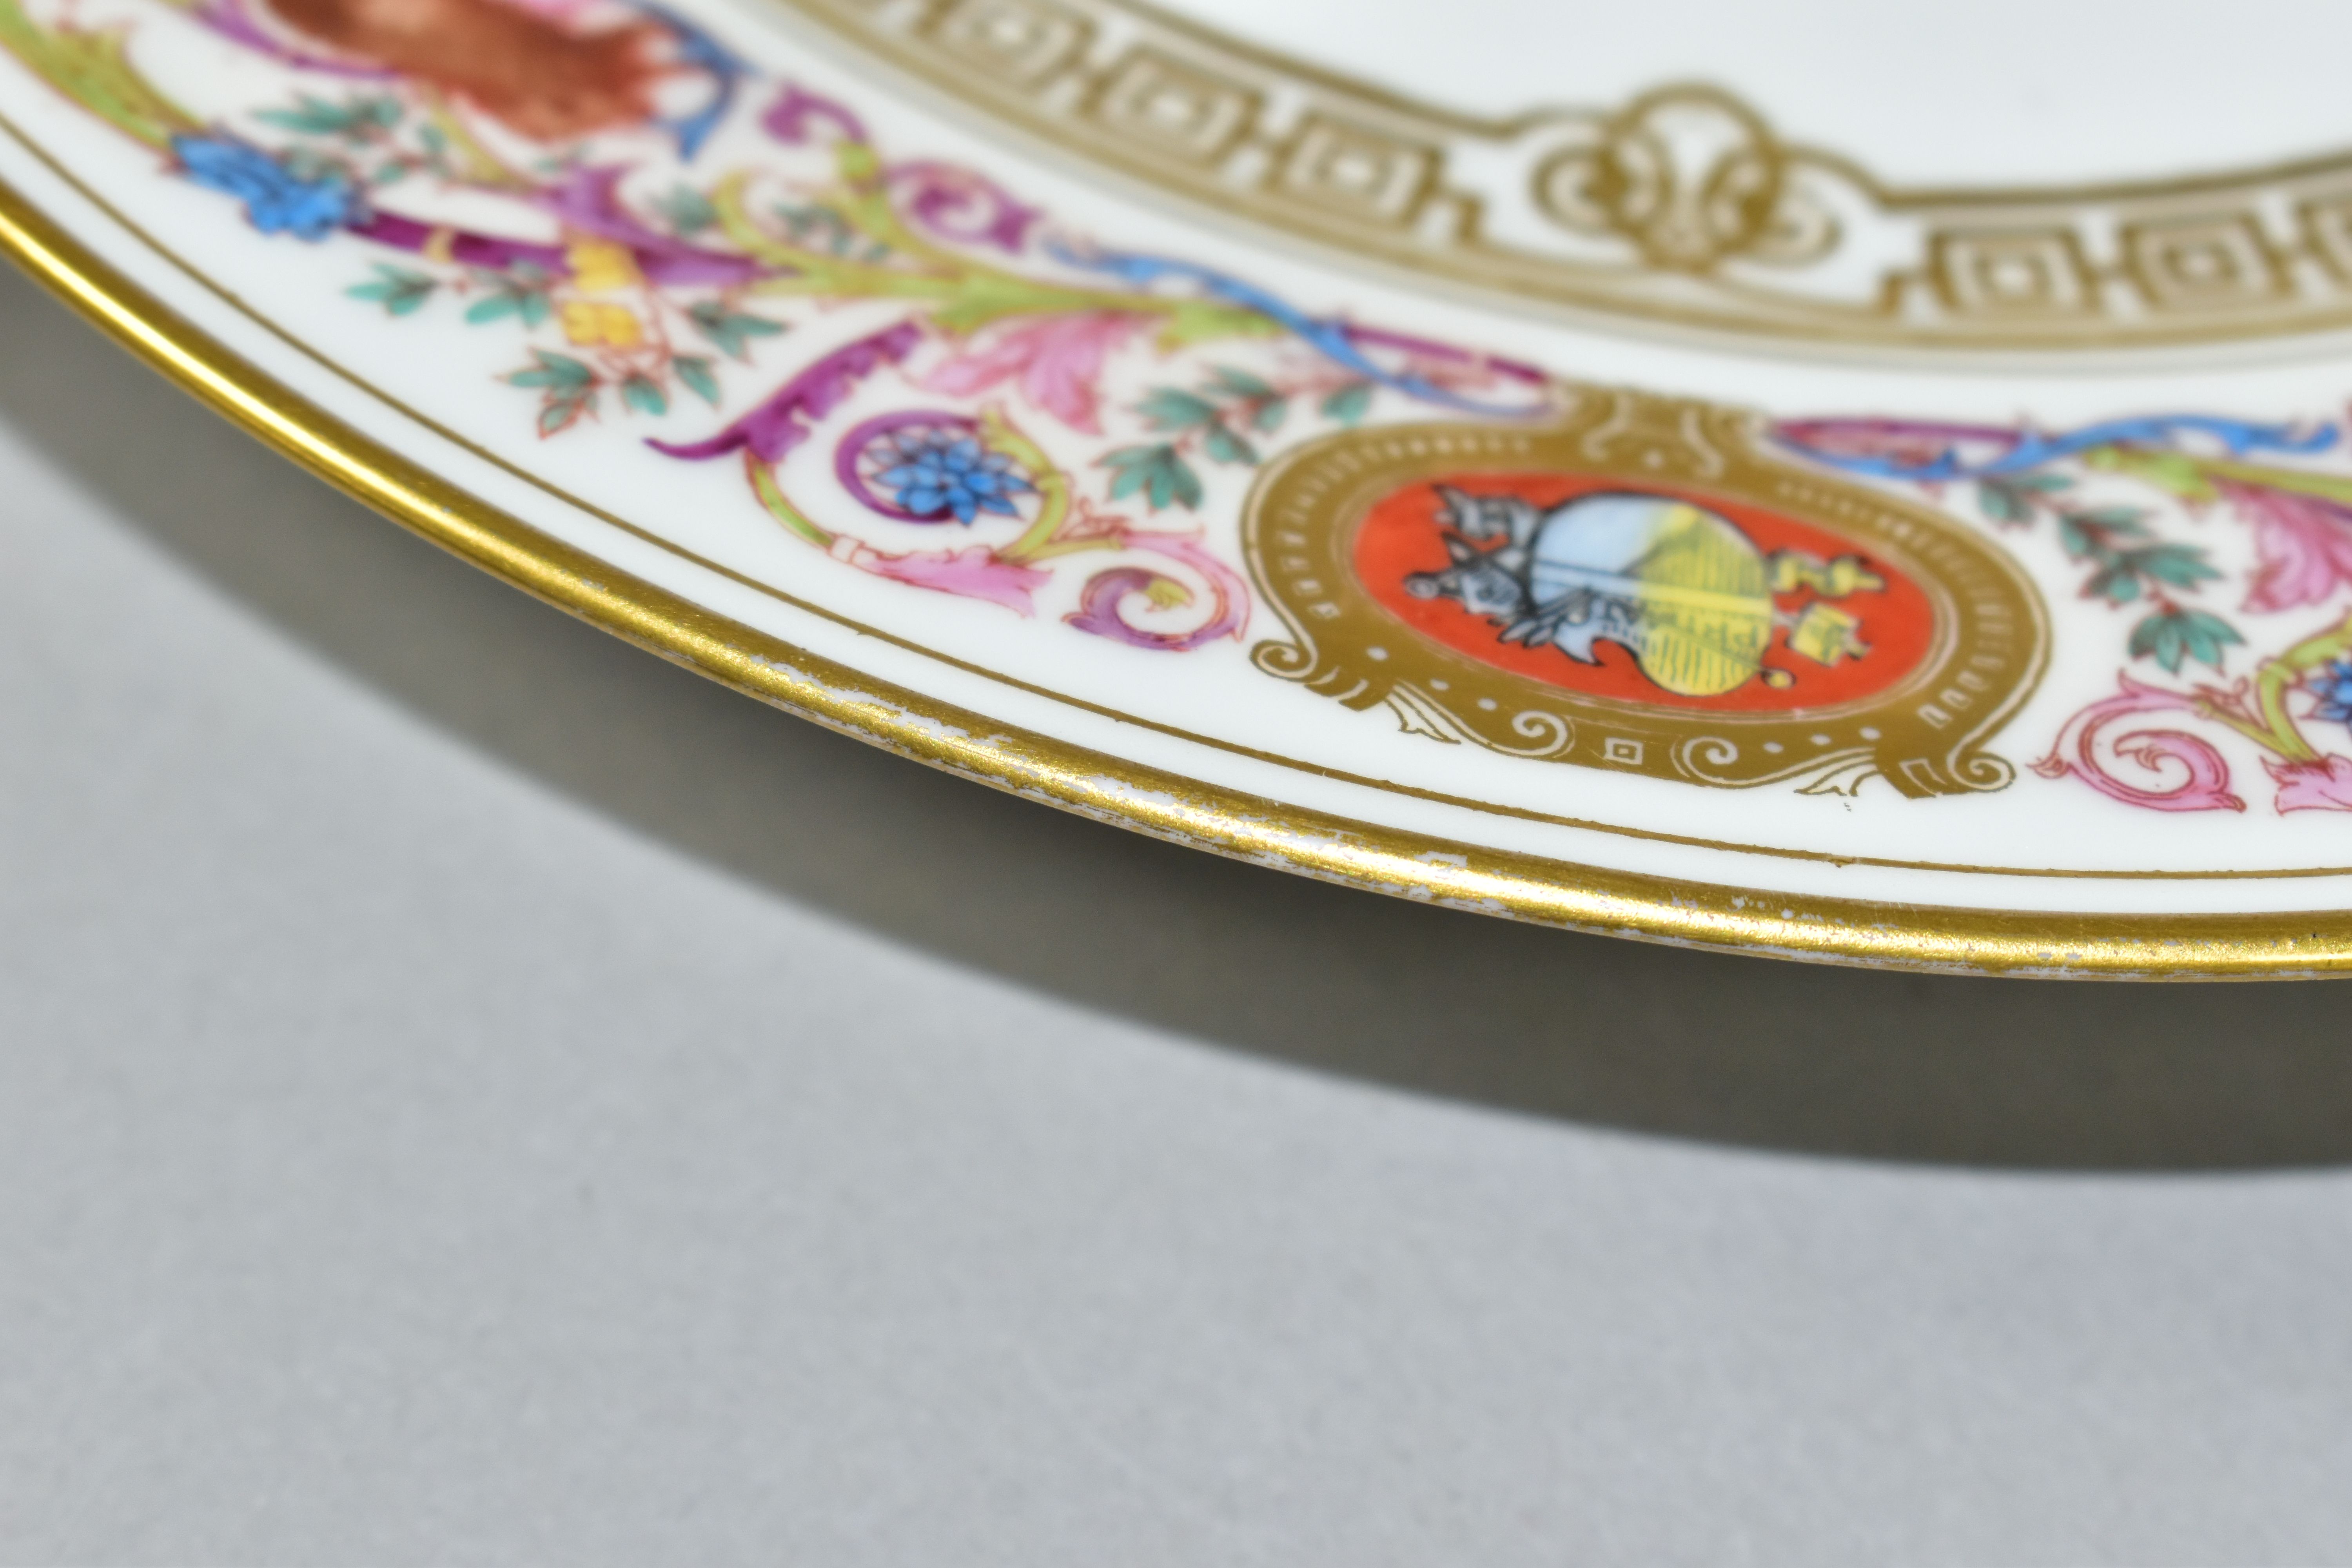 A SEVRES PORCELAIN DESSERT PLATE, from the Royal Hunting Service, featuring a scrolling border - Image 8 of 9